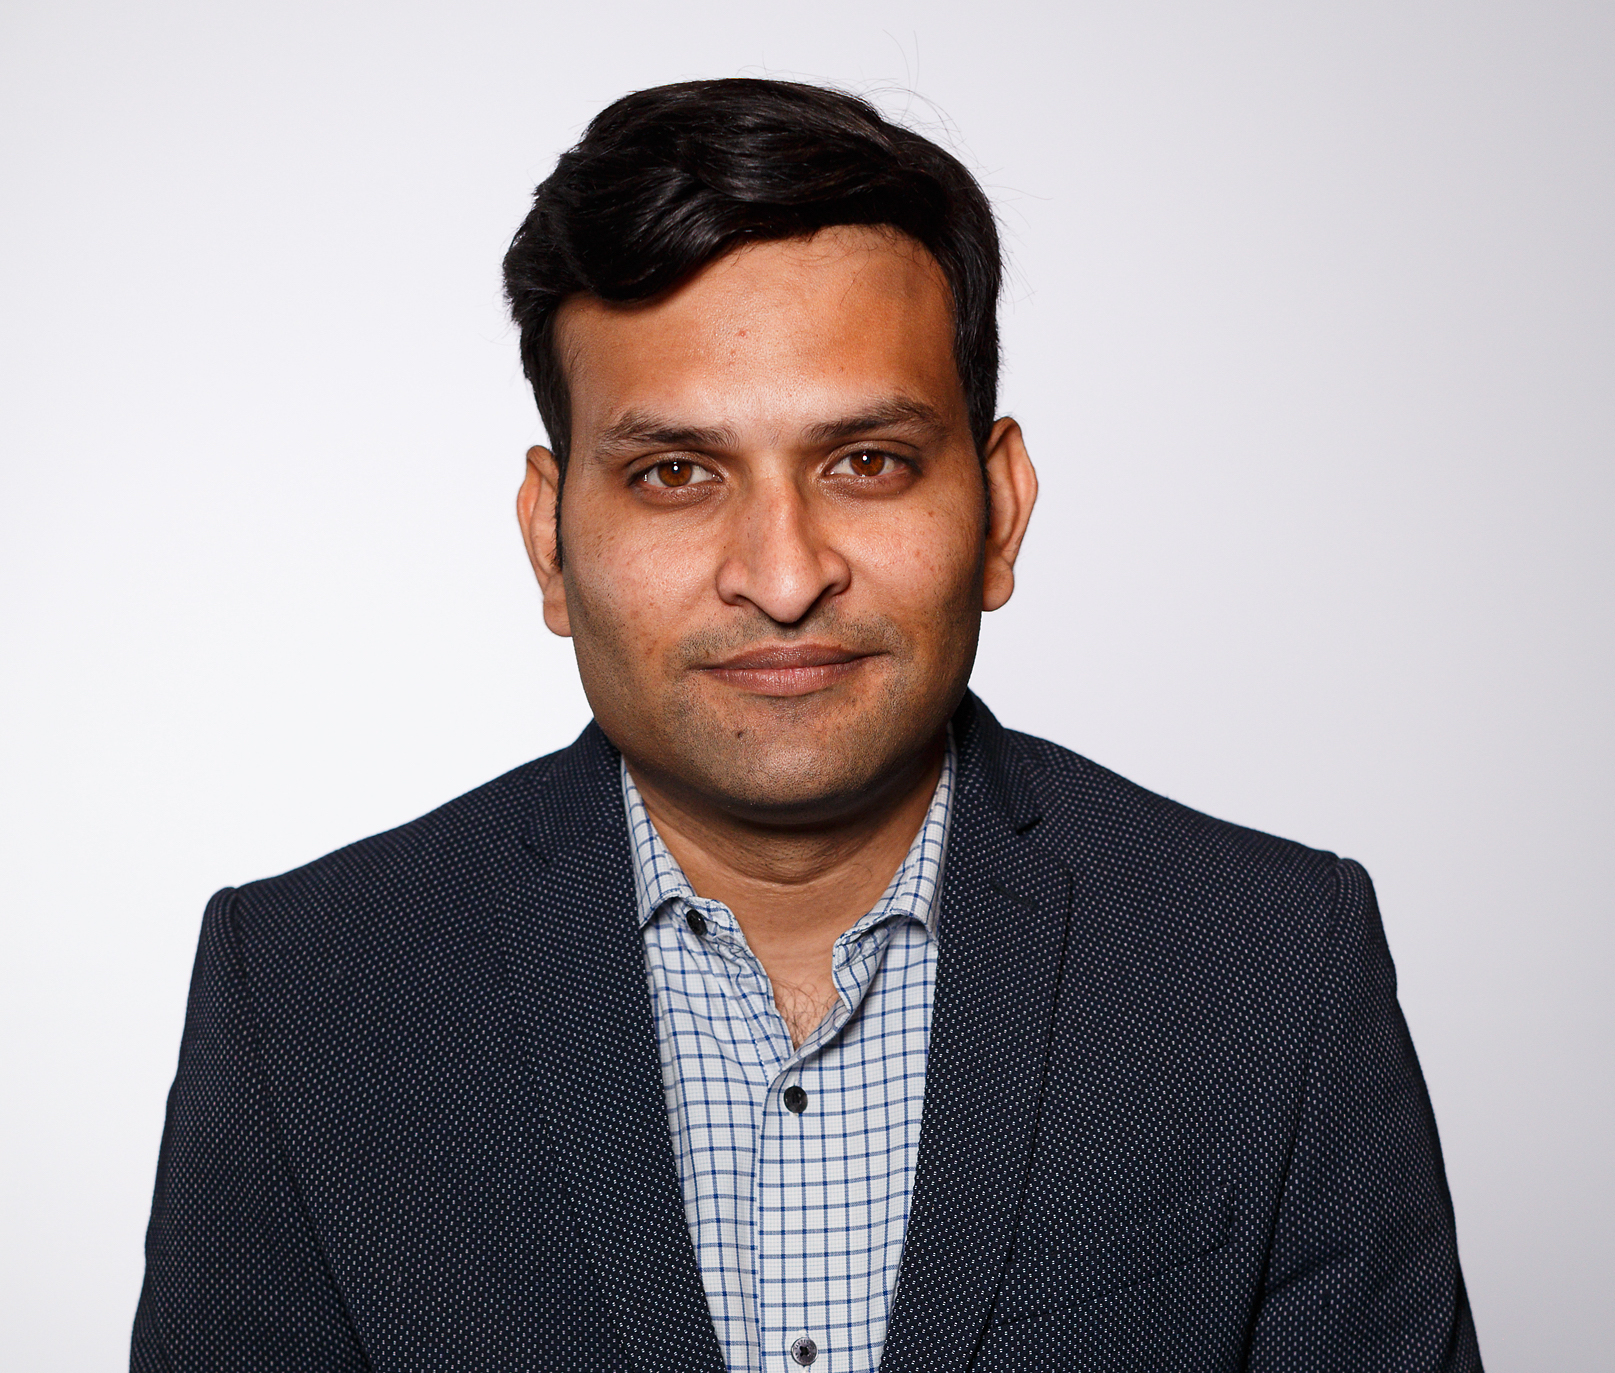 A photo of Prateek, he's an Indian man, clean shaven with dark mid-length hair wearing a black blazer and a checked white and blue shirt. He is smiling at the camera and is photographed against a white background.